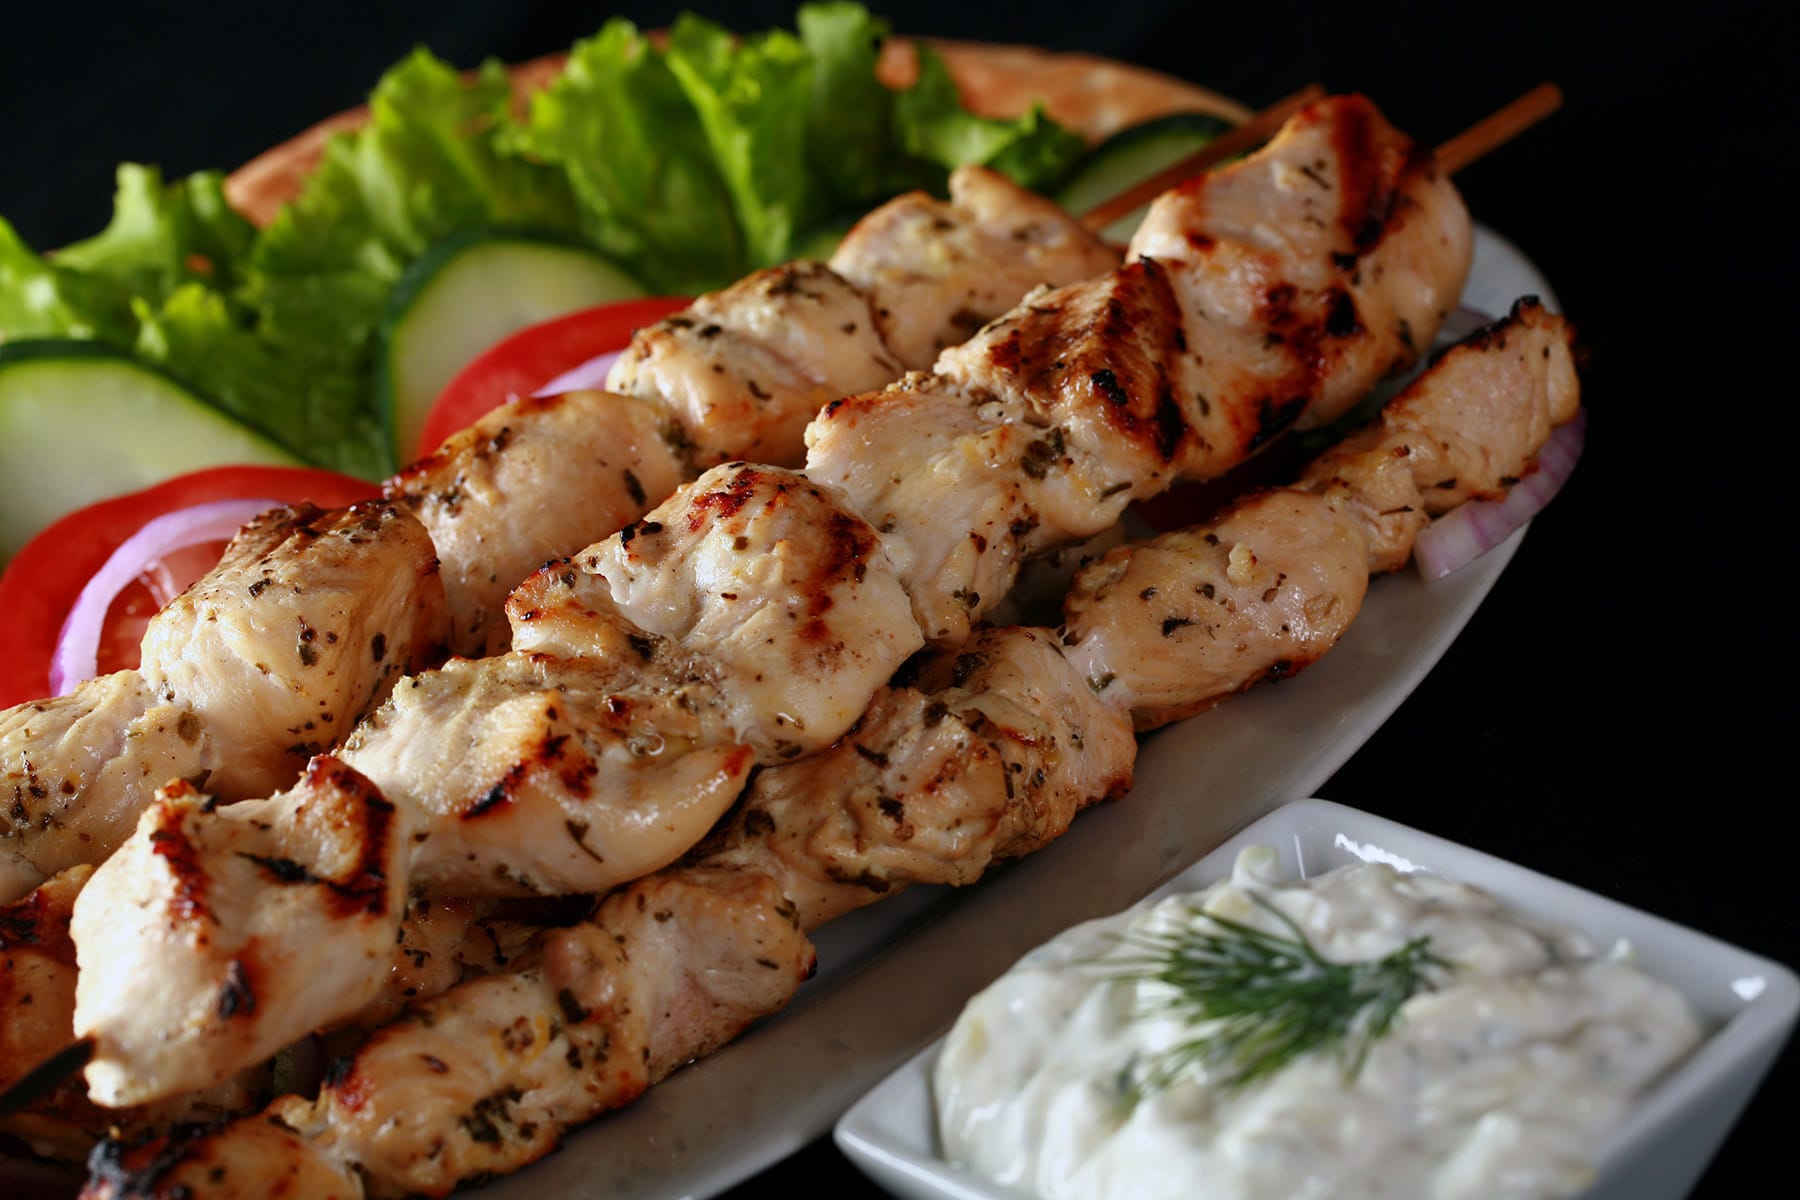 Several grilled chicken soulaki skewers on a platter with red onions, tomatoes, and cucumber slices.